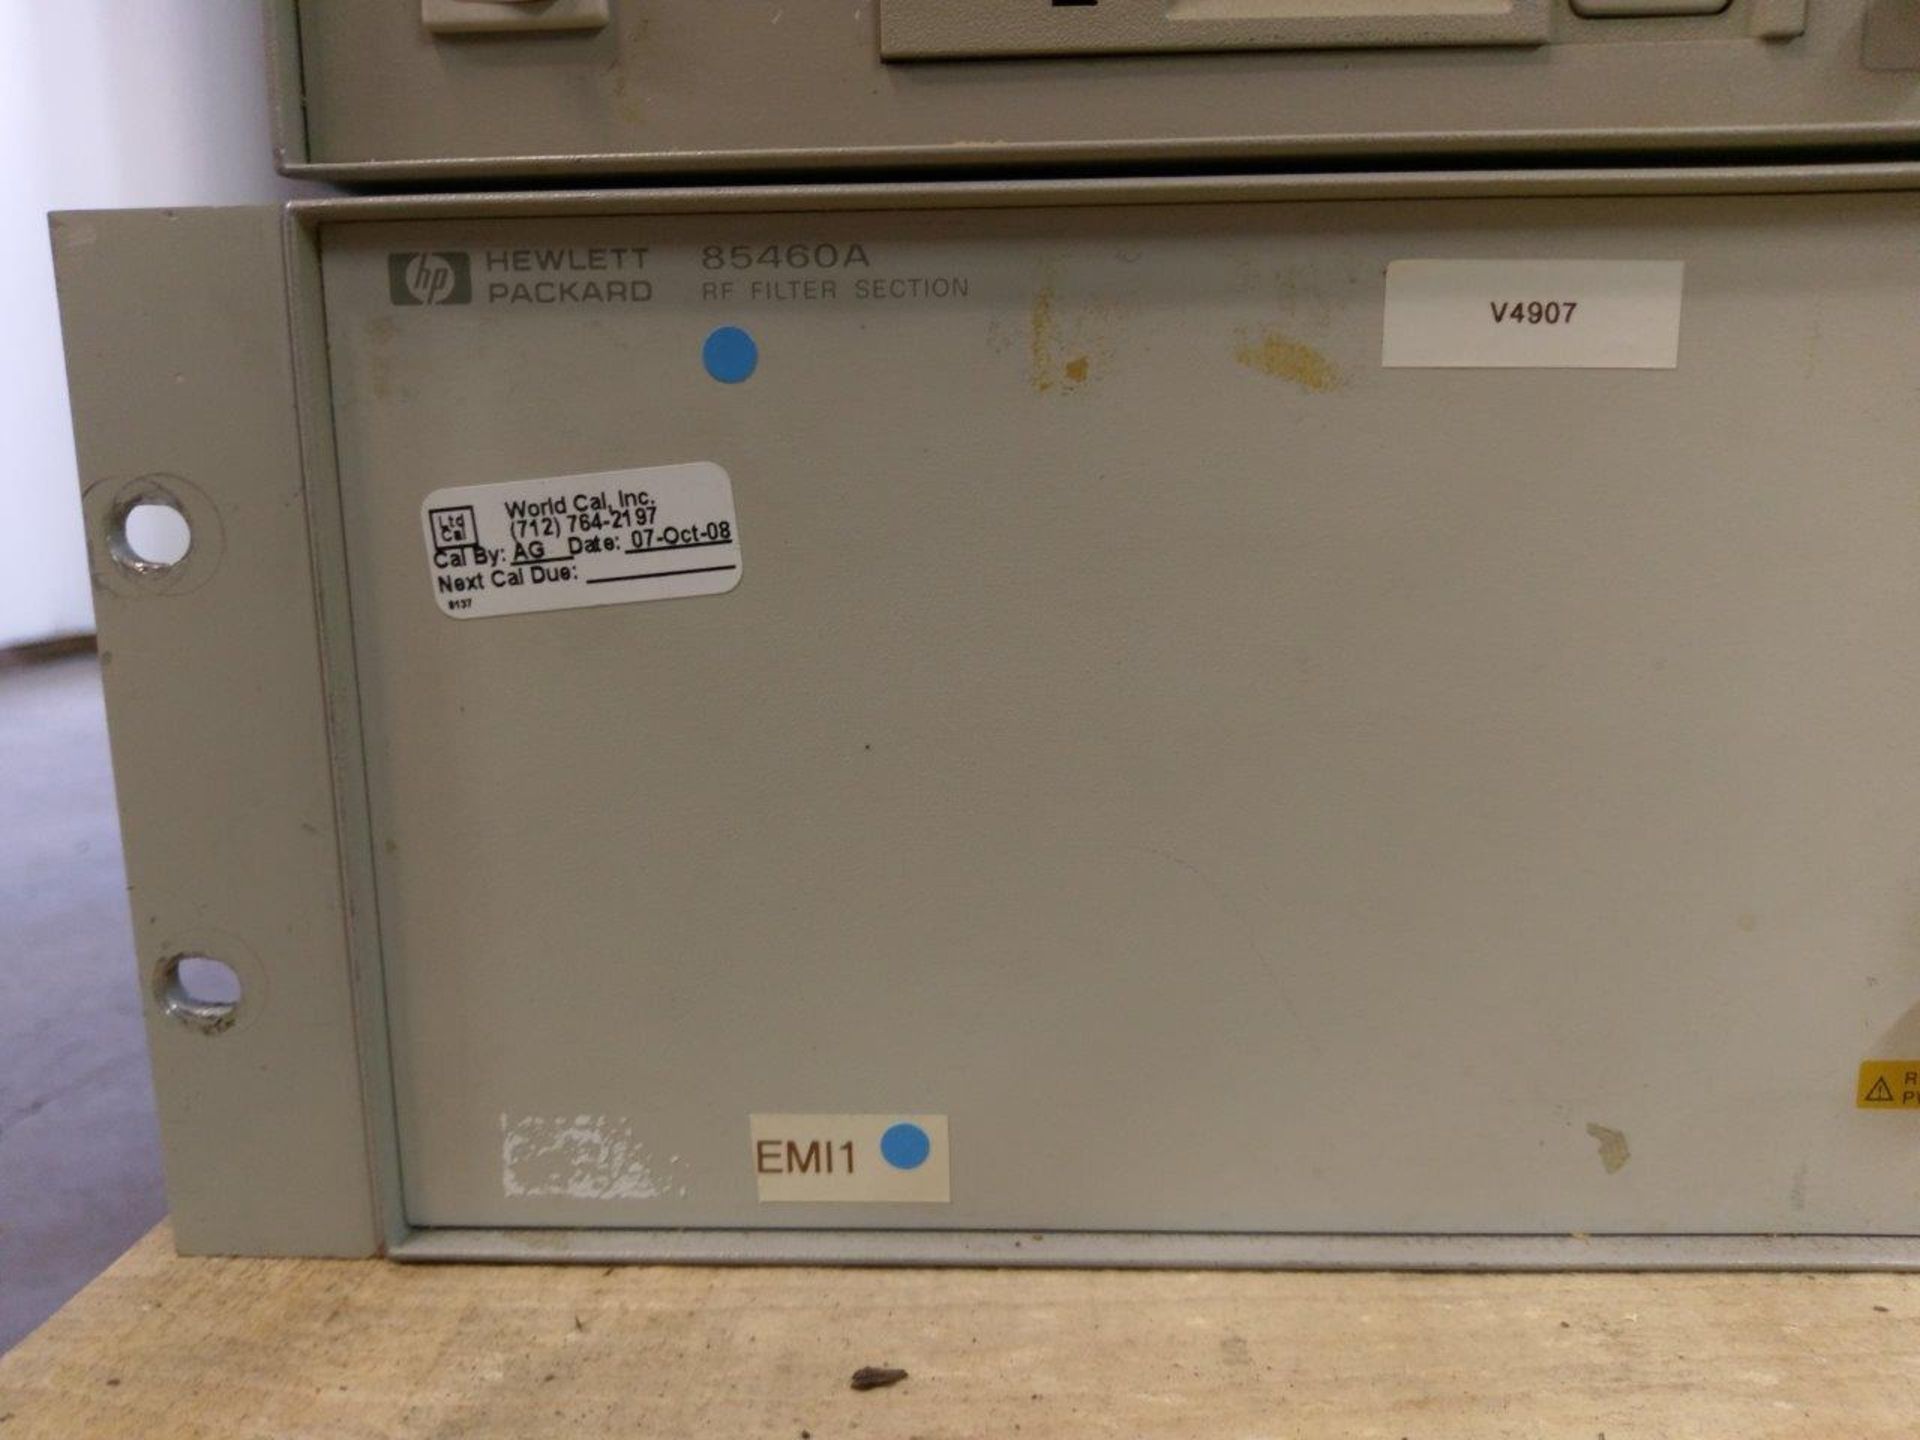 HP Hewlett Packard Model # 8546A EMI Receiver with Model # 85460A RF Filter Section - Image 4 of 8